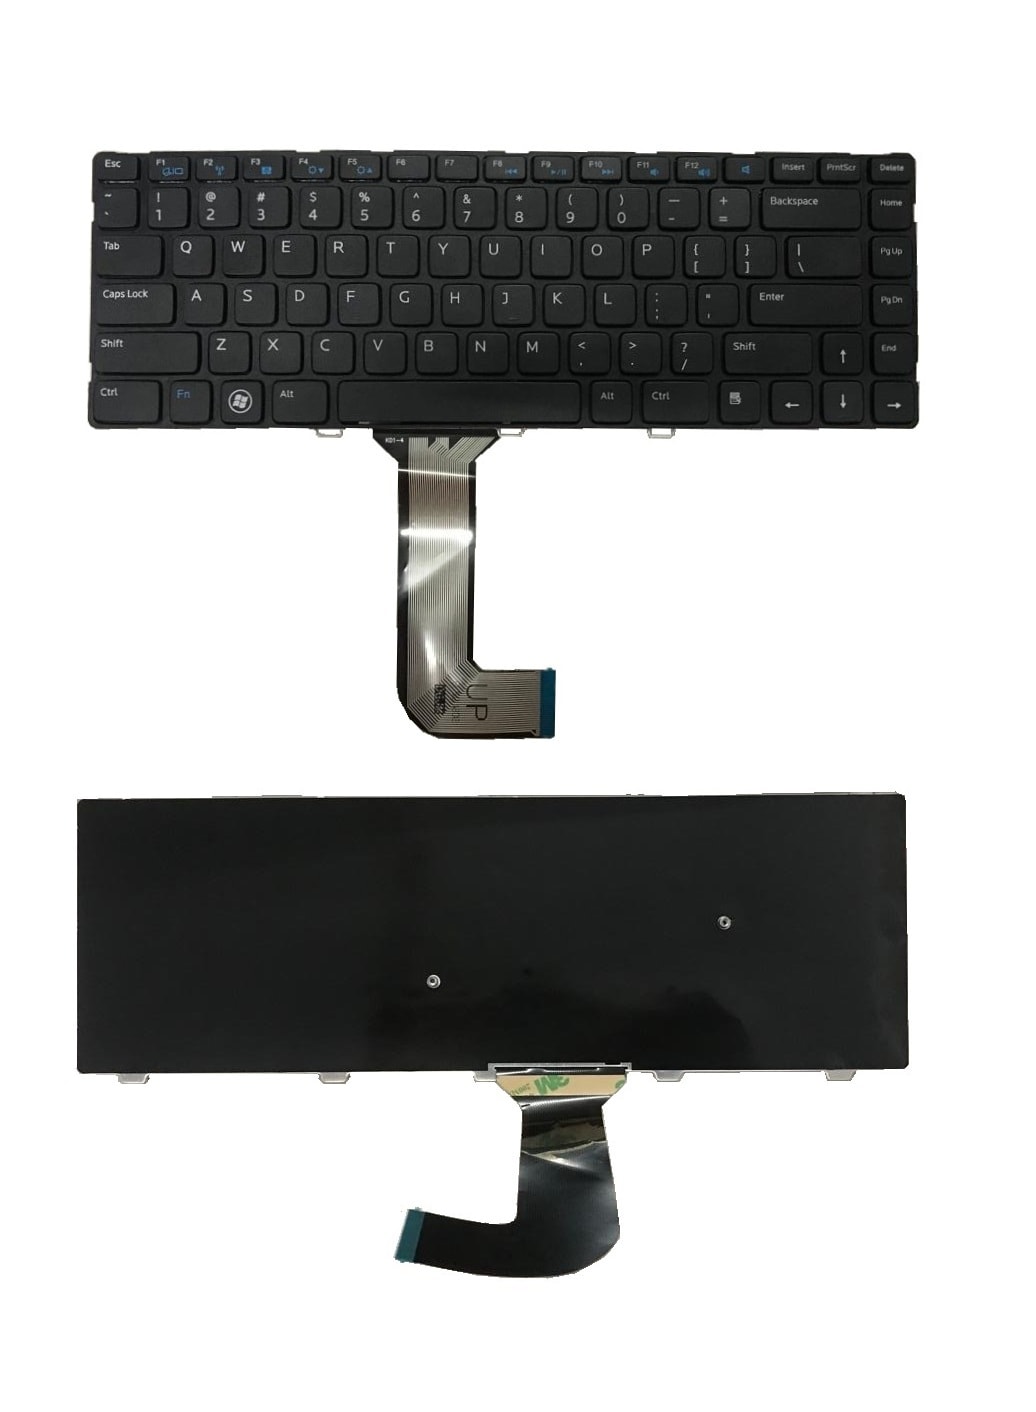 Keyboard for Dell Inspiron 14 3421, 5421, 2421, 1528, 2518, Vostro 2421, Latitude 3440 Laptops.